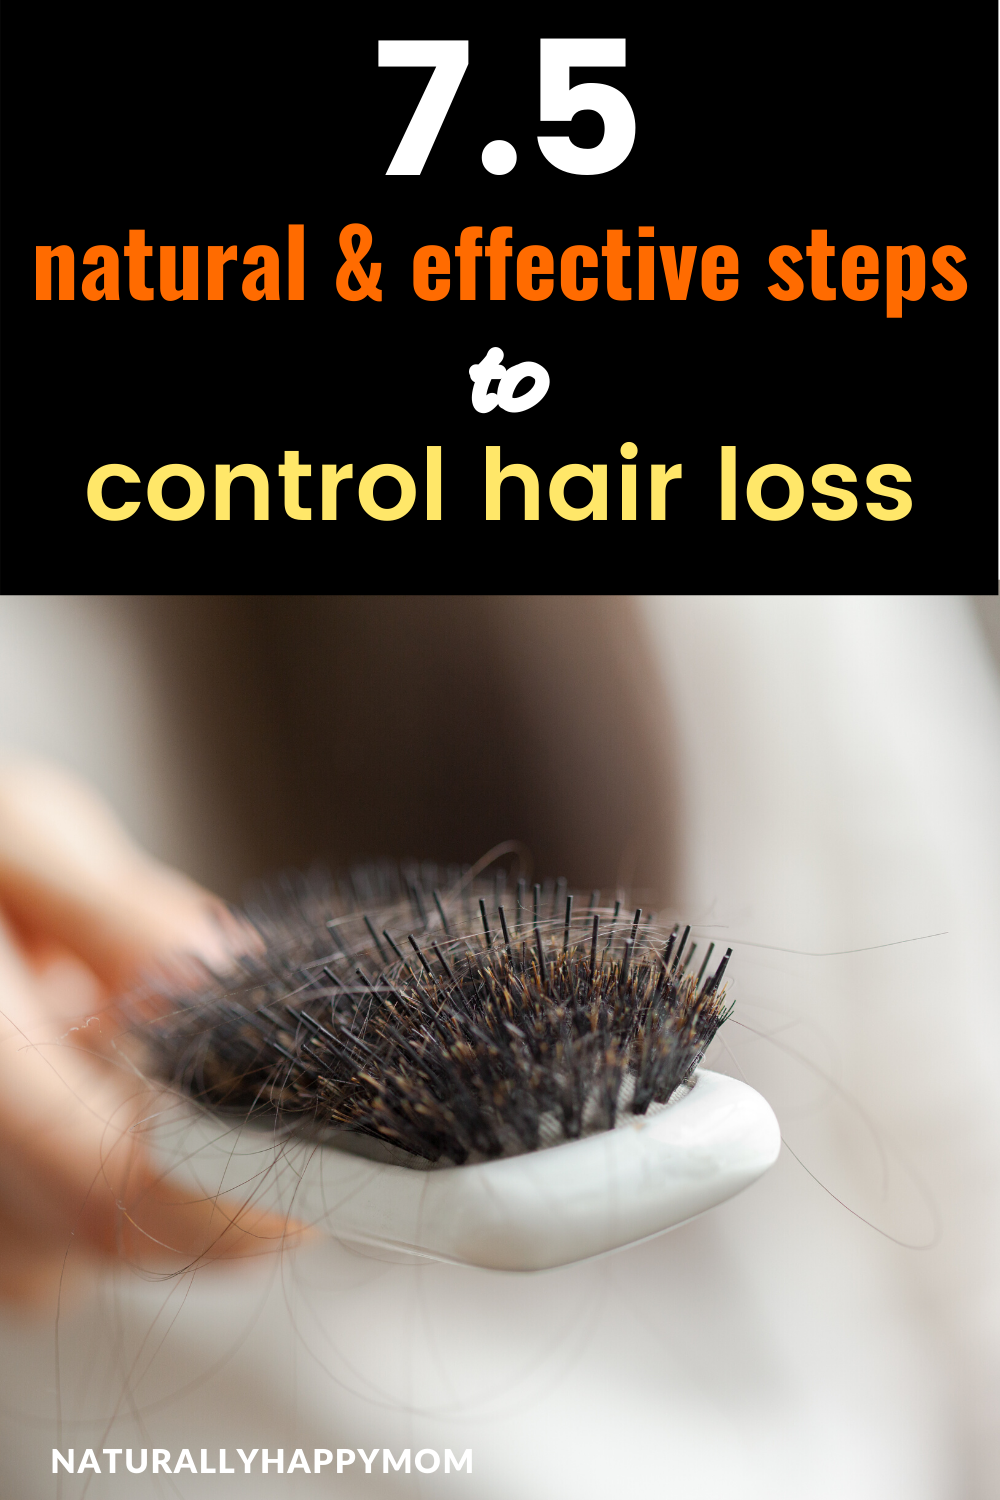 How to control hair loss in 2020